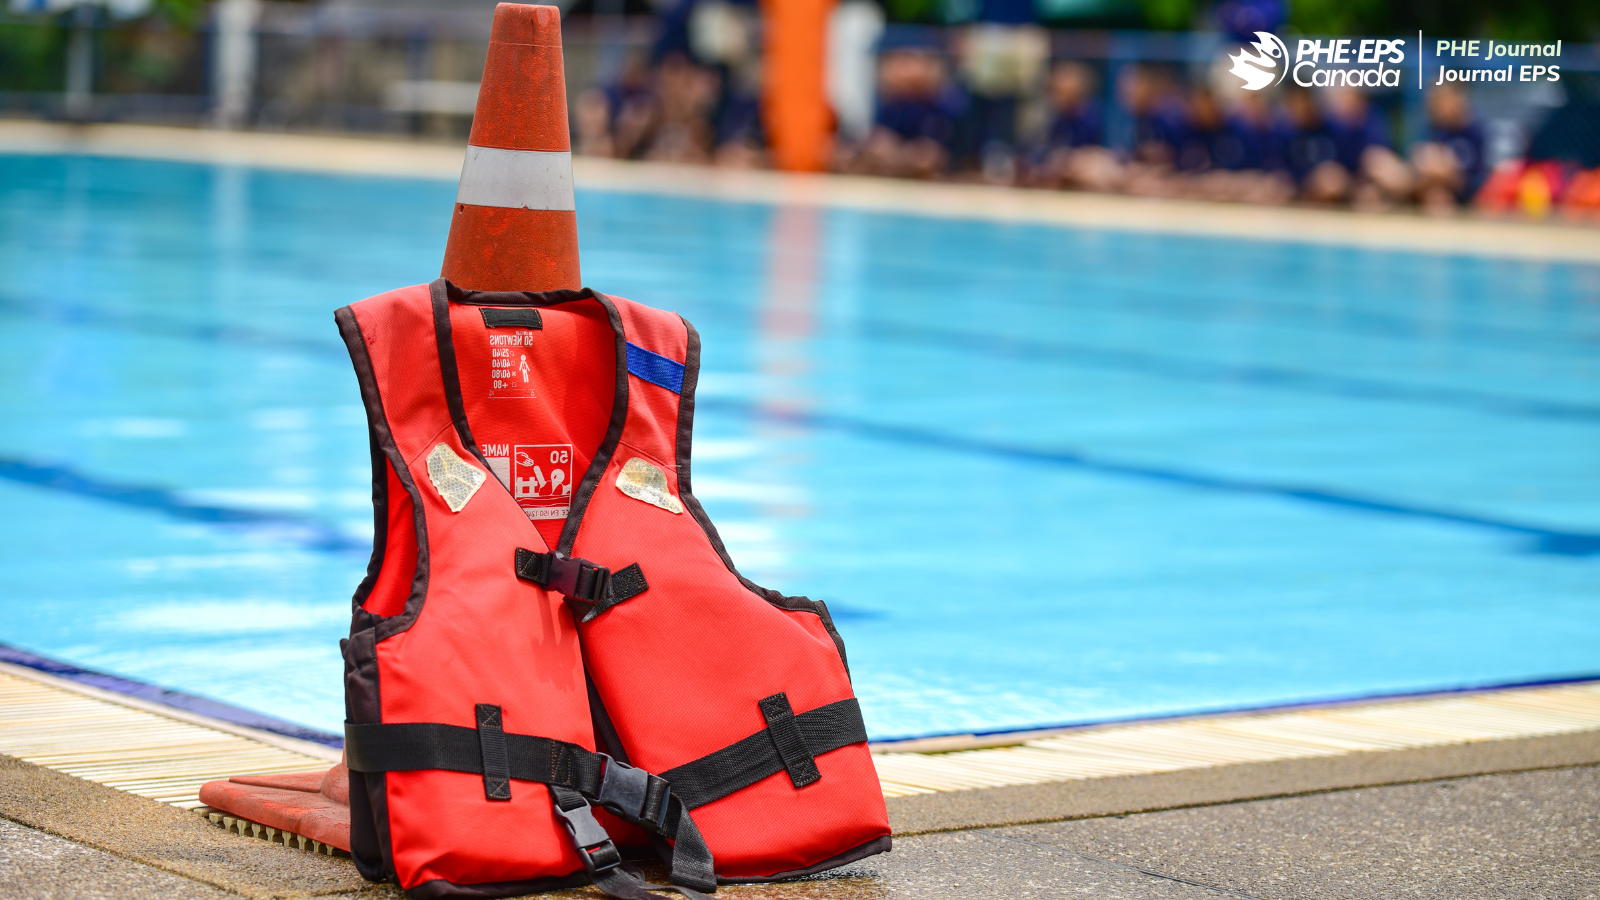 The photo shows a lifejacket lying next to a safety cone next to a swimming pool